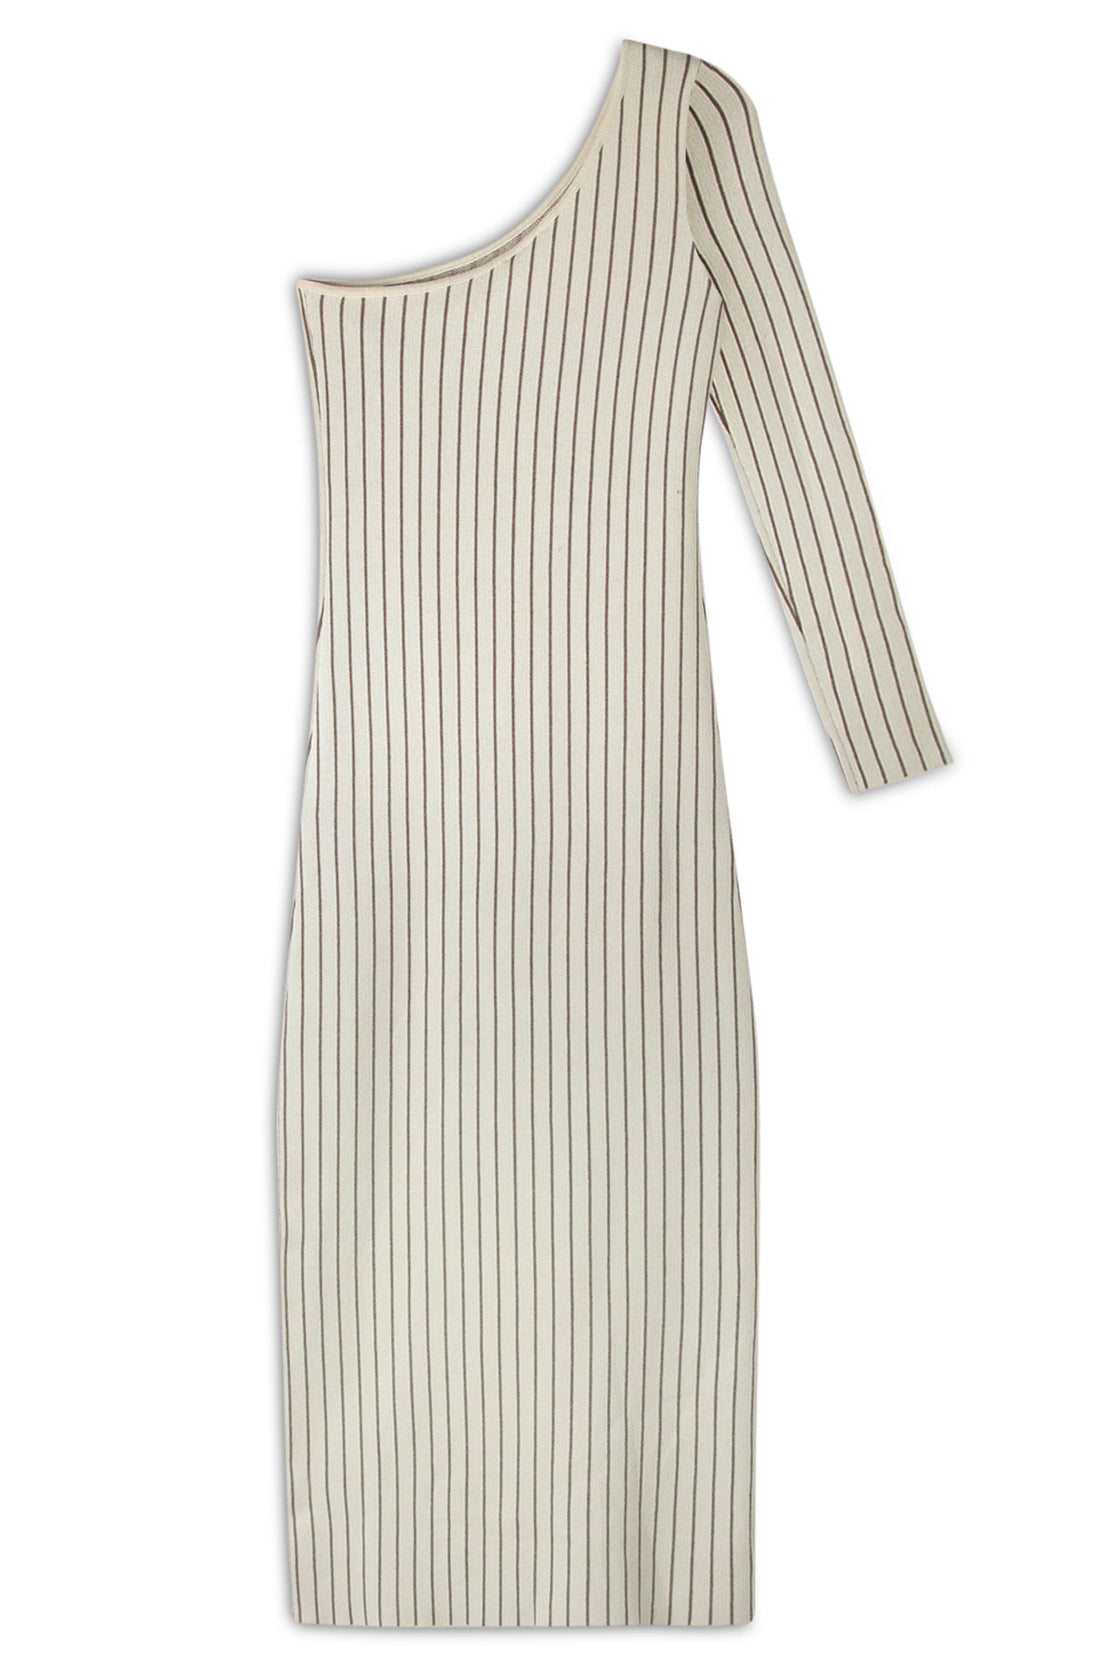 COCOA STRIPE ONE SHOULDER KNITTED DRESS